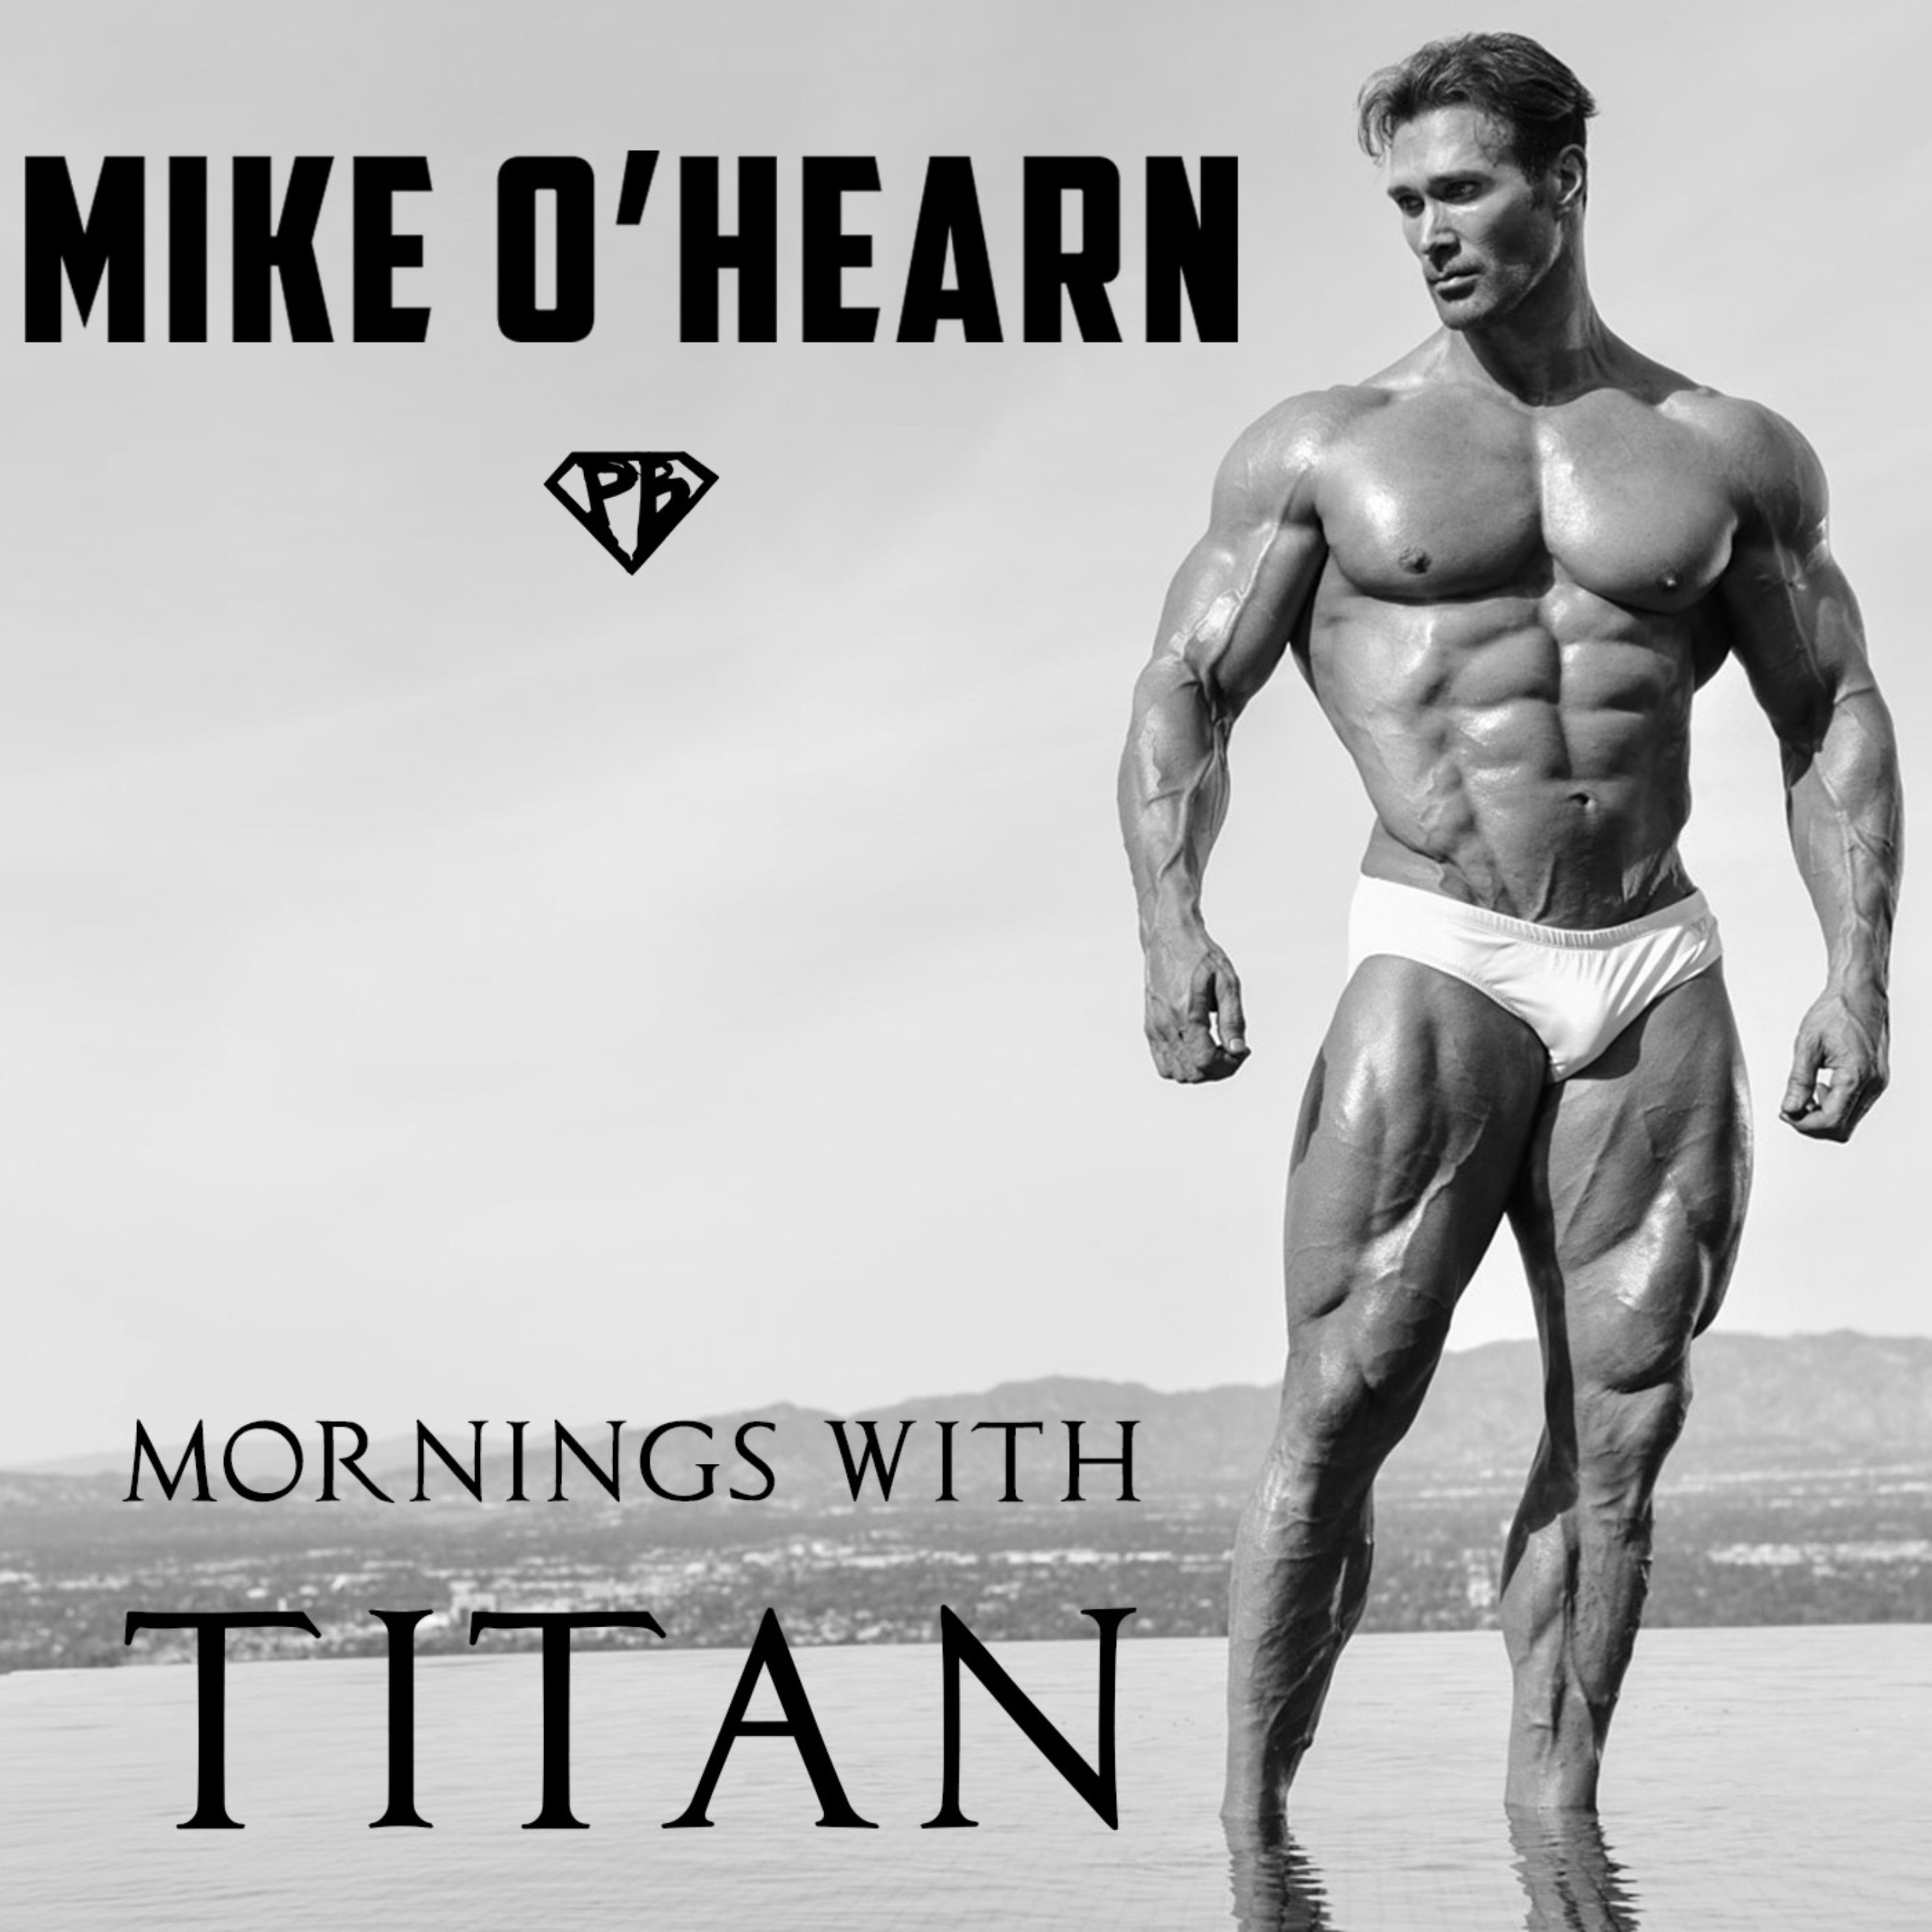 The Mike O'Hearn Show